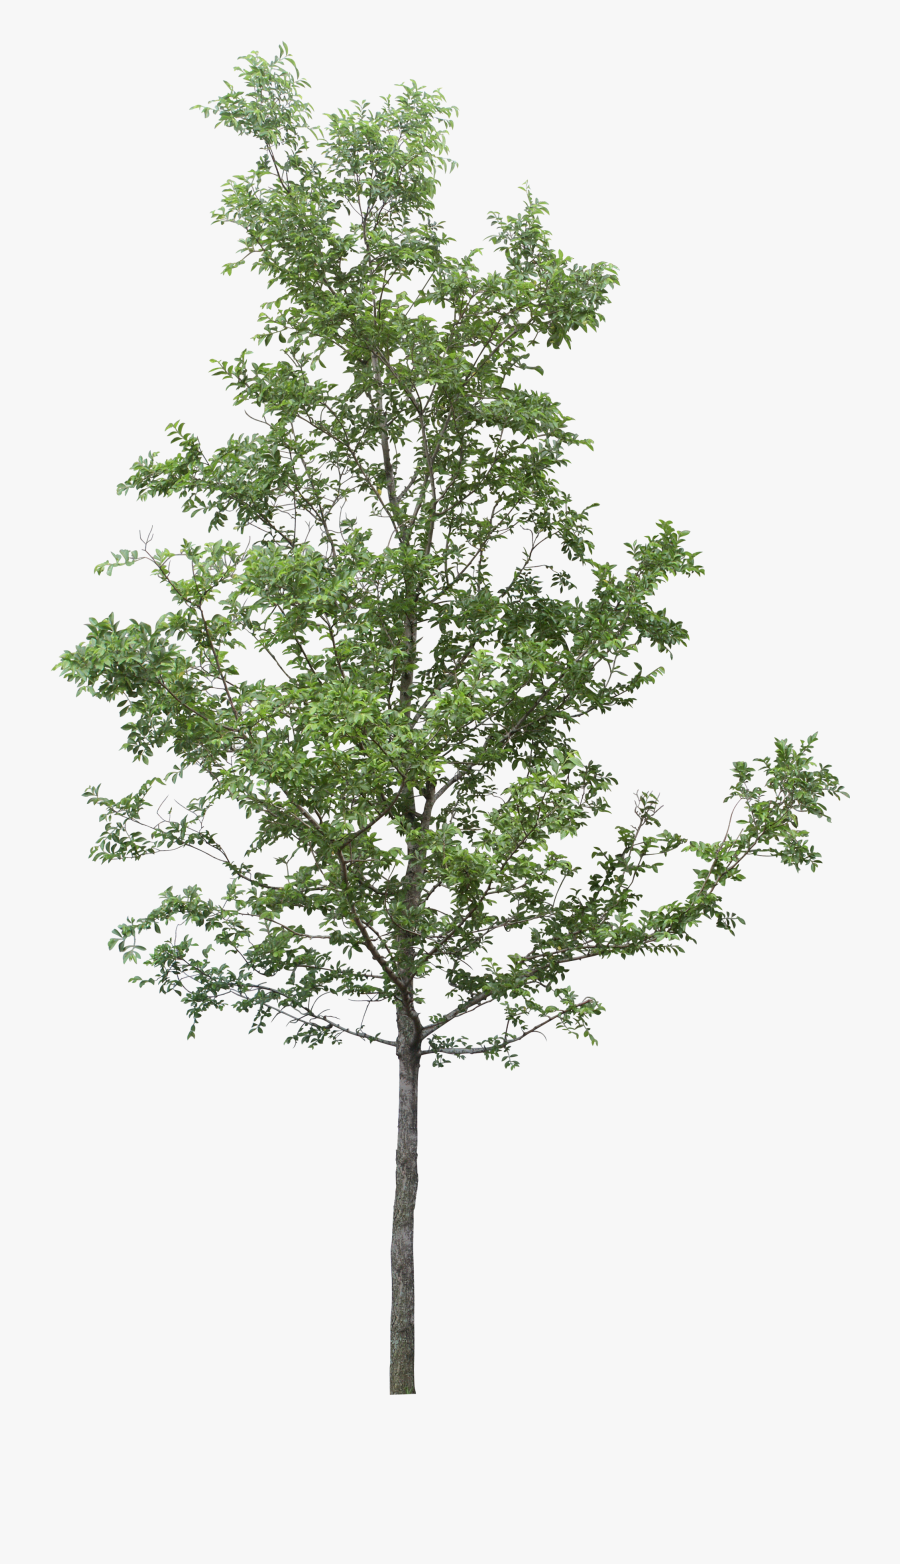 Free Tree Png Transparent Images, Download Free Clip, Transparent Clipart